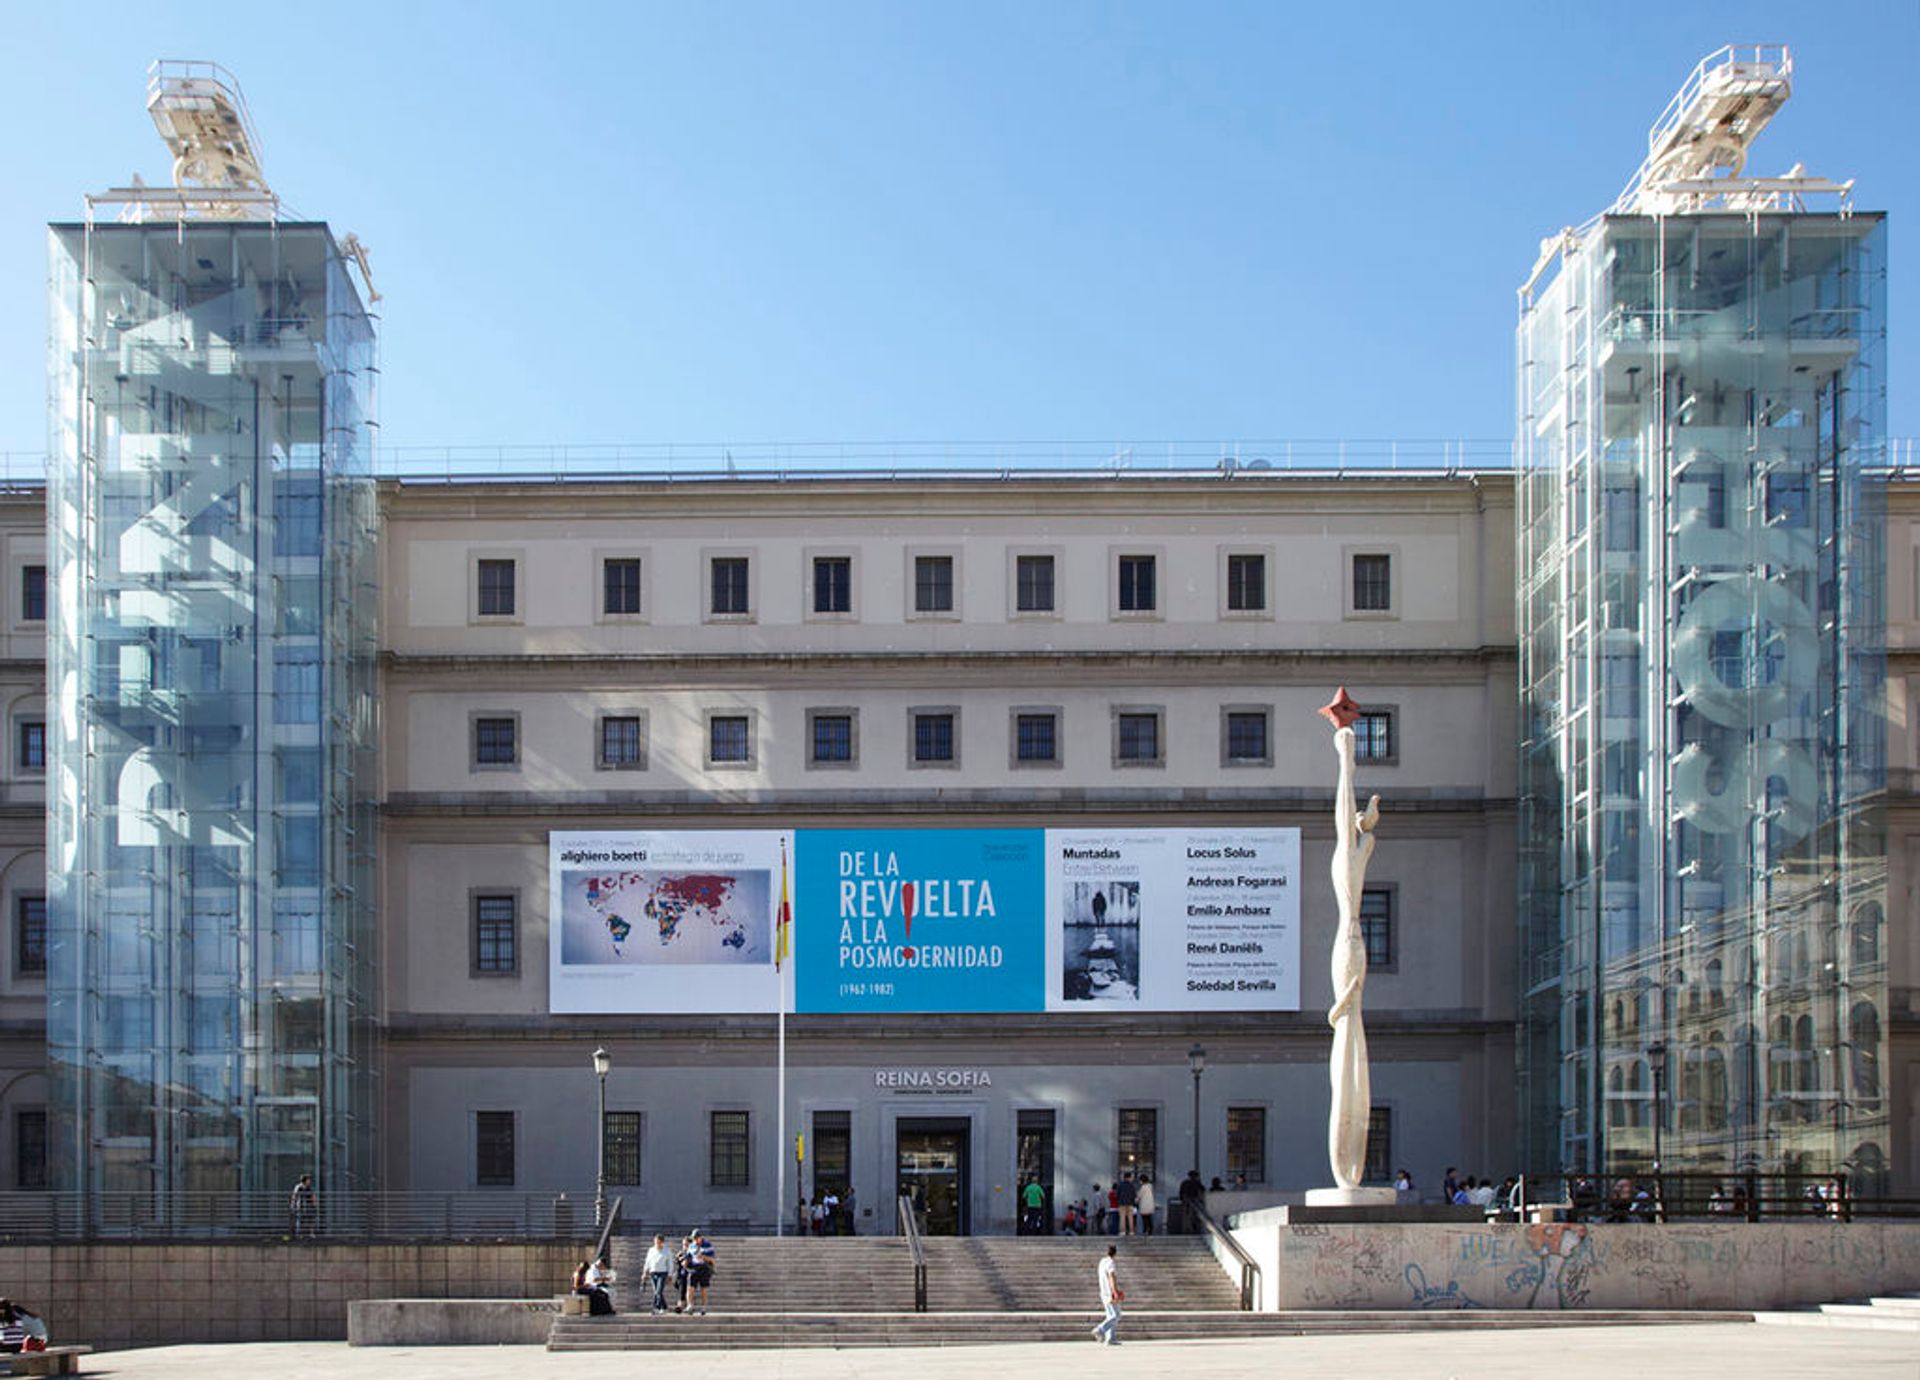 The exterior of the Museo Reina Sofia, Madrid. The long-serving director Manuel Borja-Villel was allegedly ousted following a right-wing manufactured culture war.

Photo: Museoreinasofia via Wikimedia